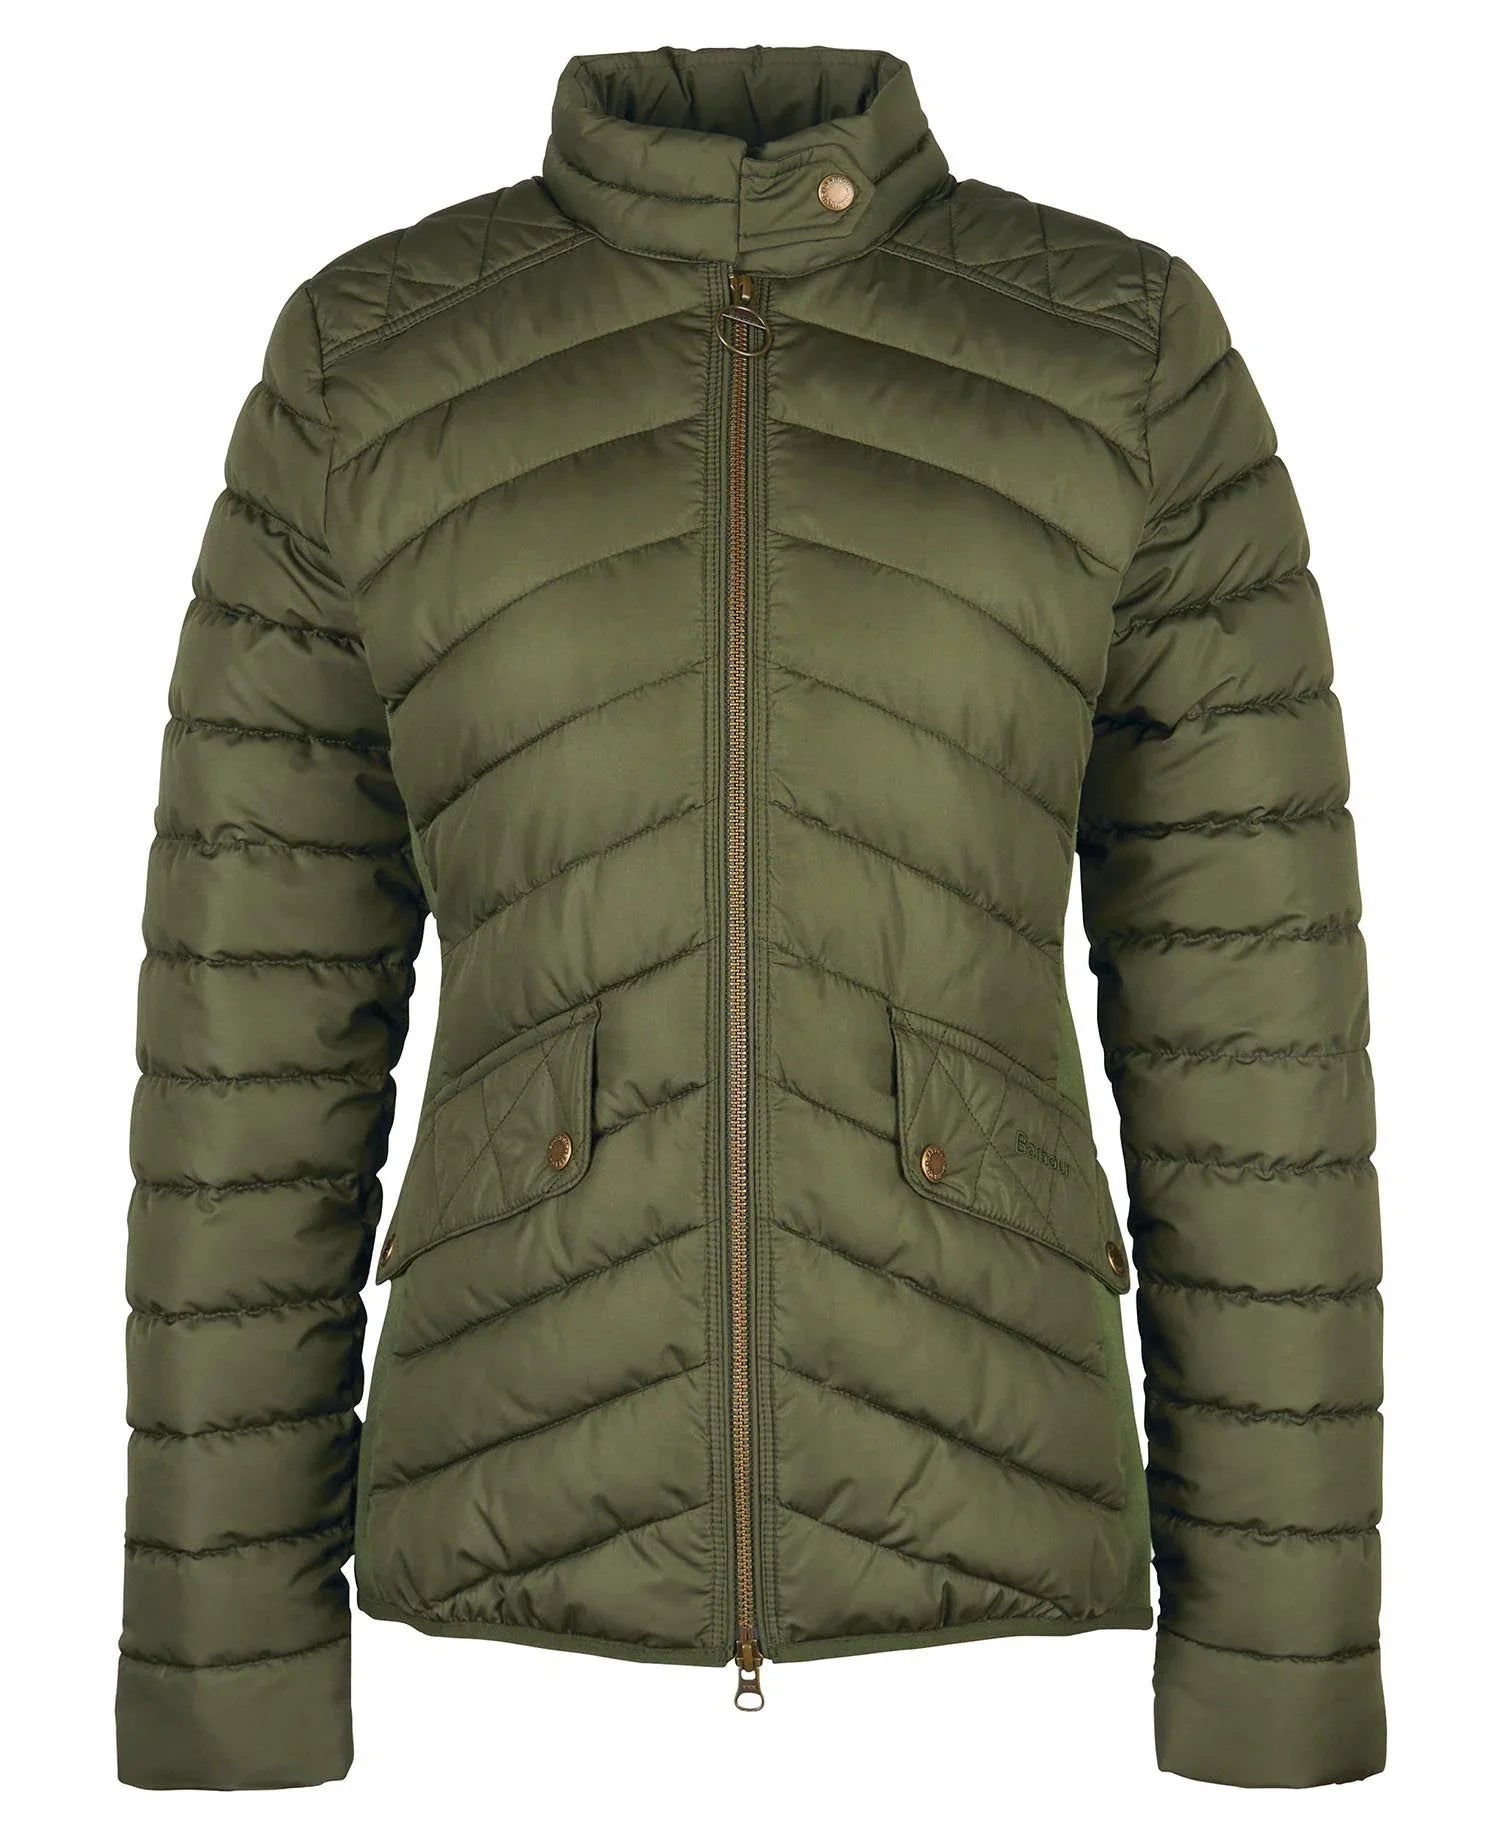 Barbour Stretch Cavalry Quilted Jacket - Olive/Olive Marl